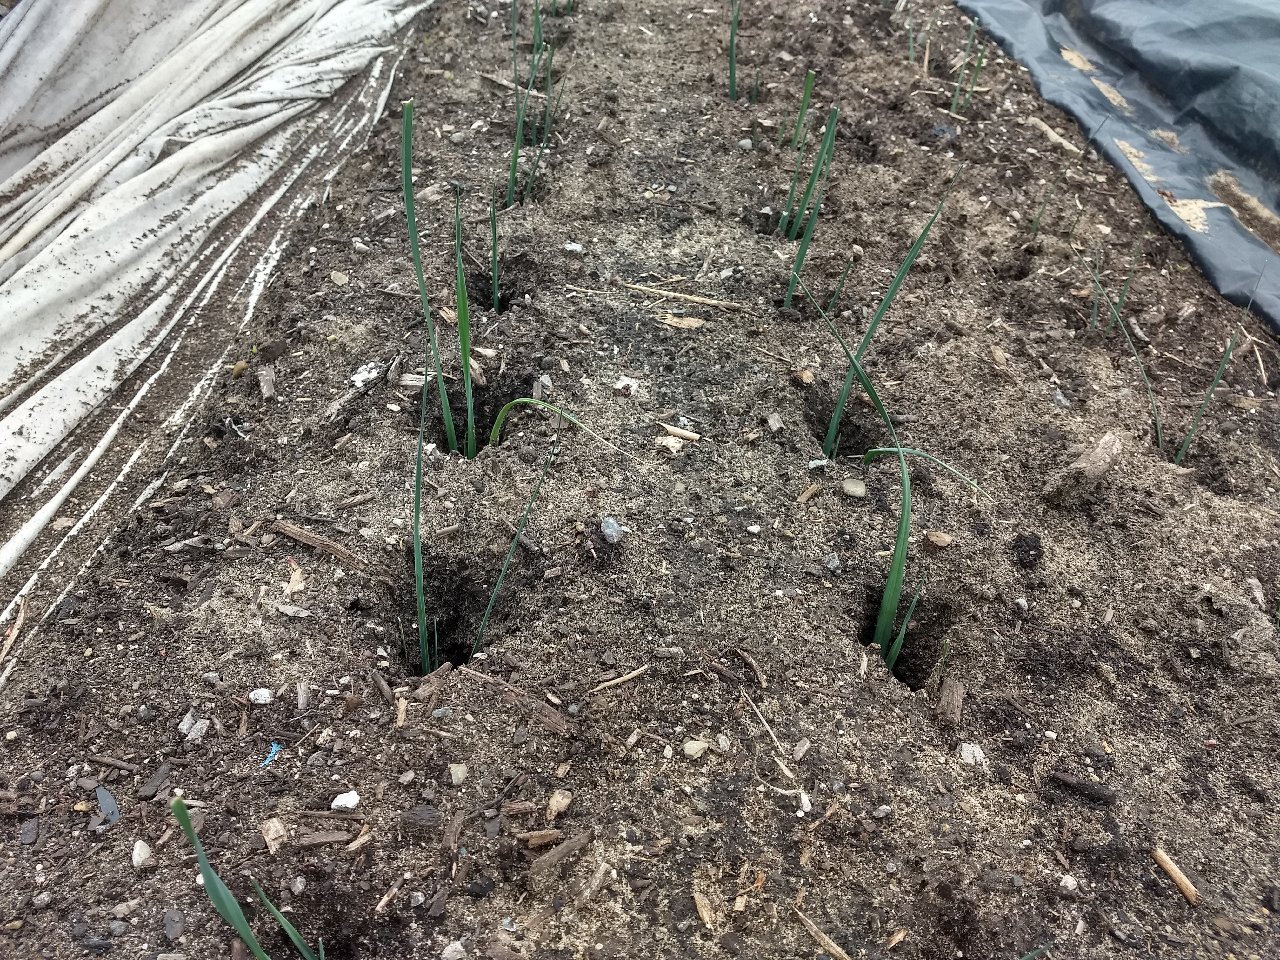 Leeks planted in ground.